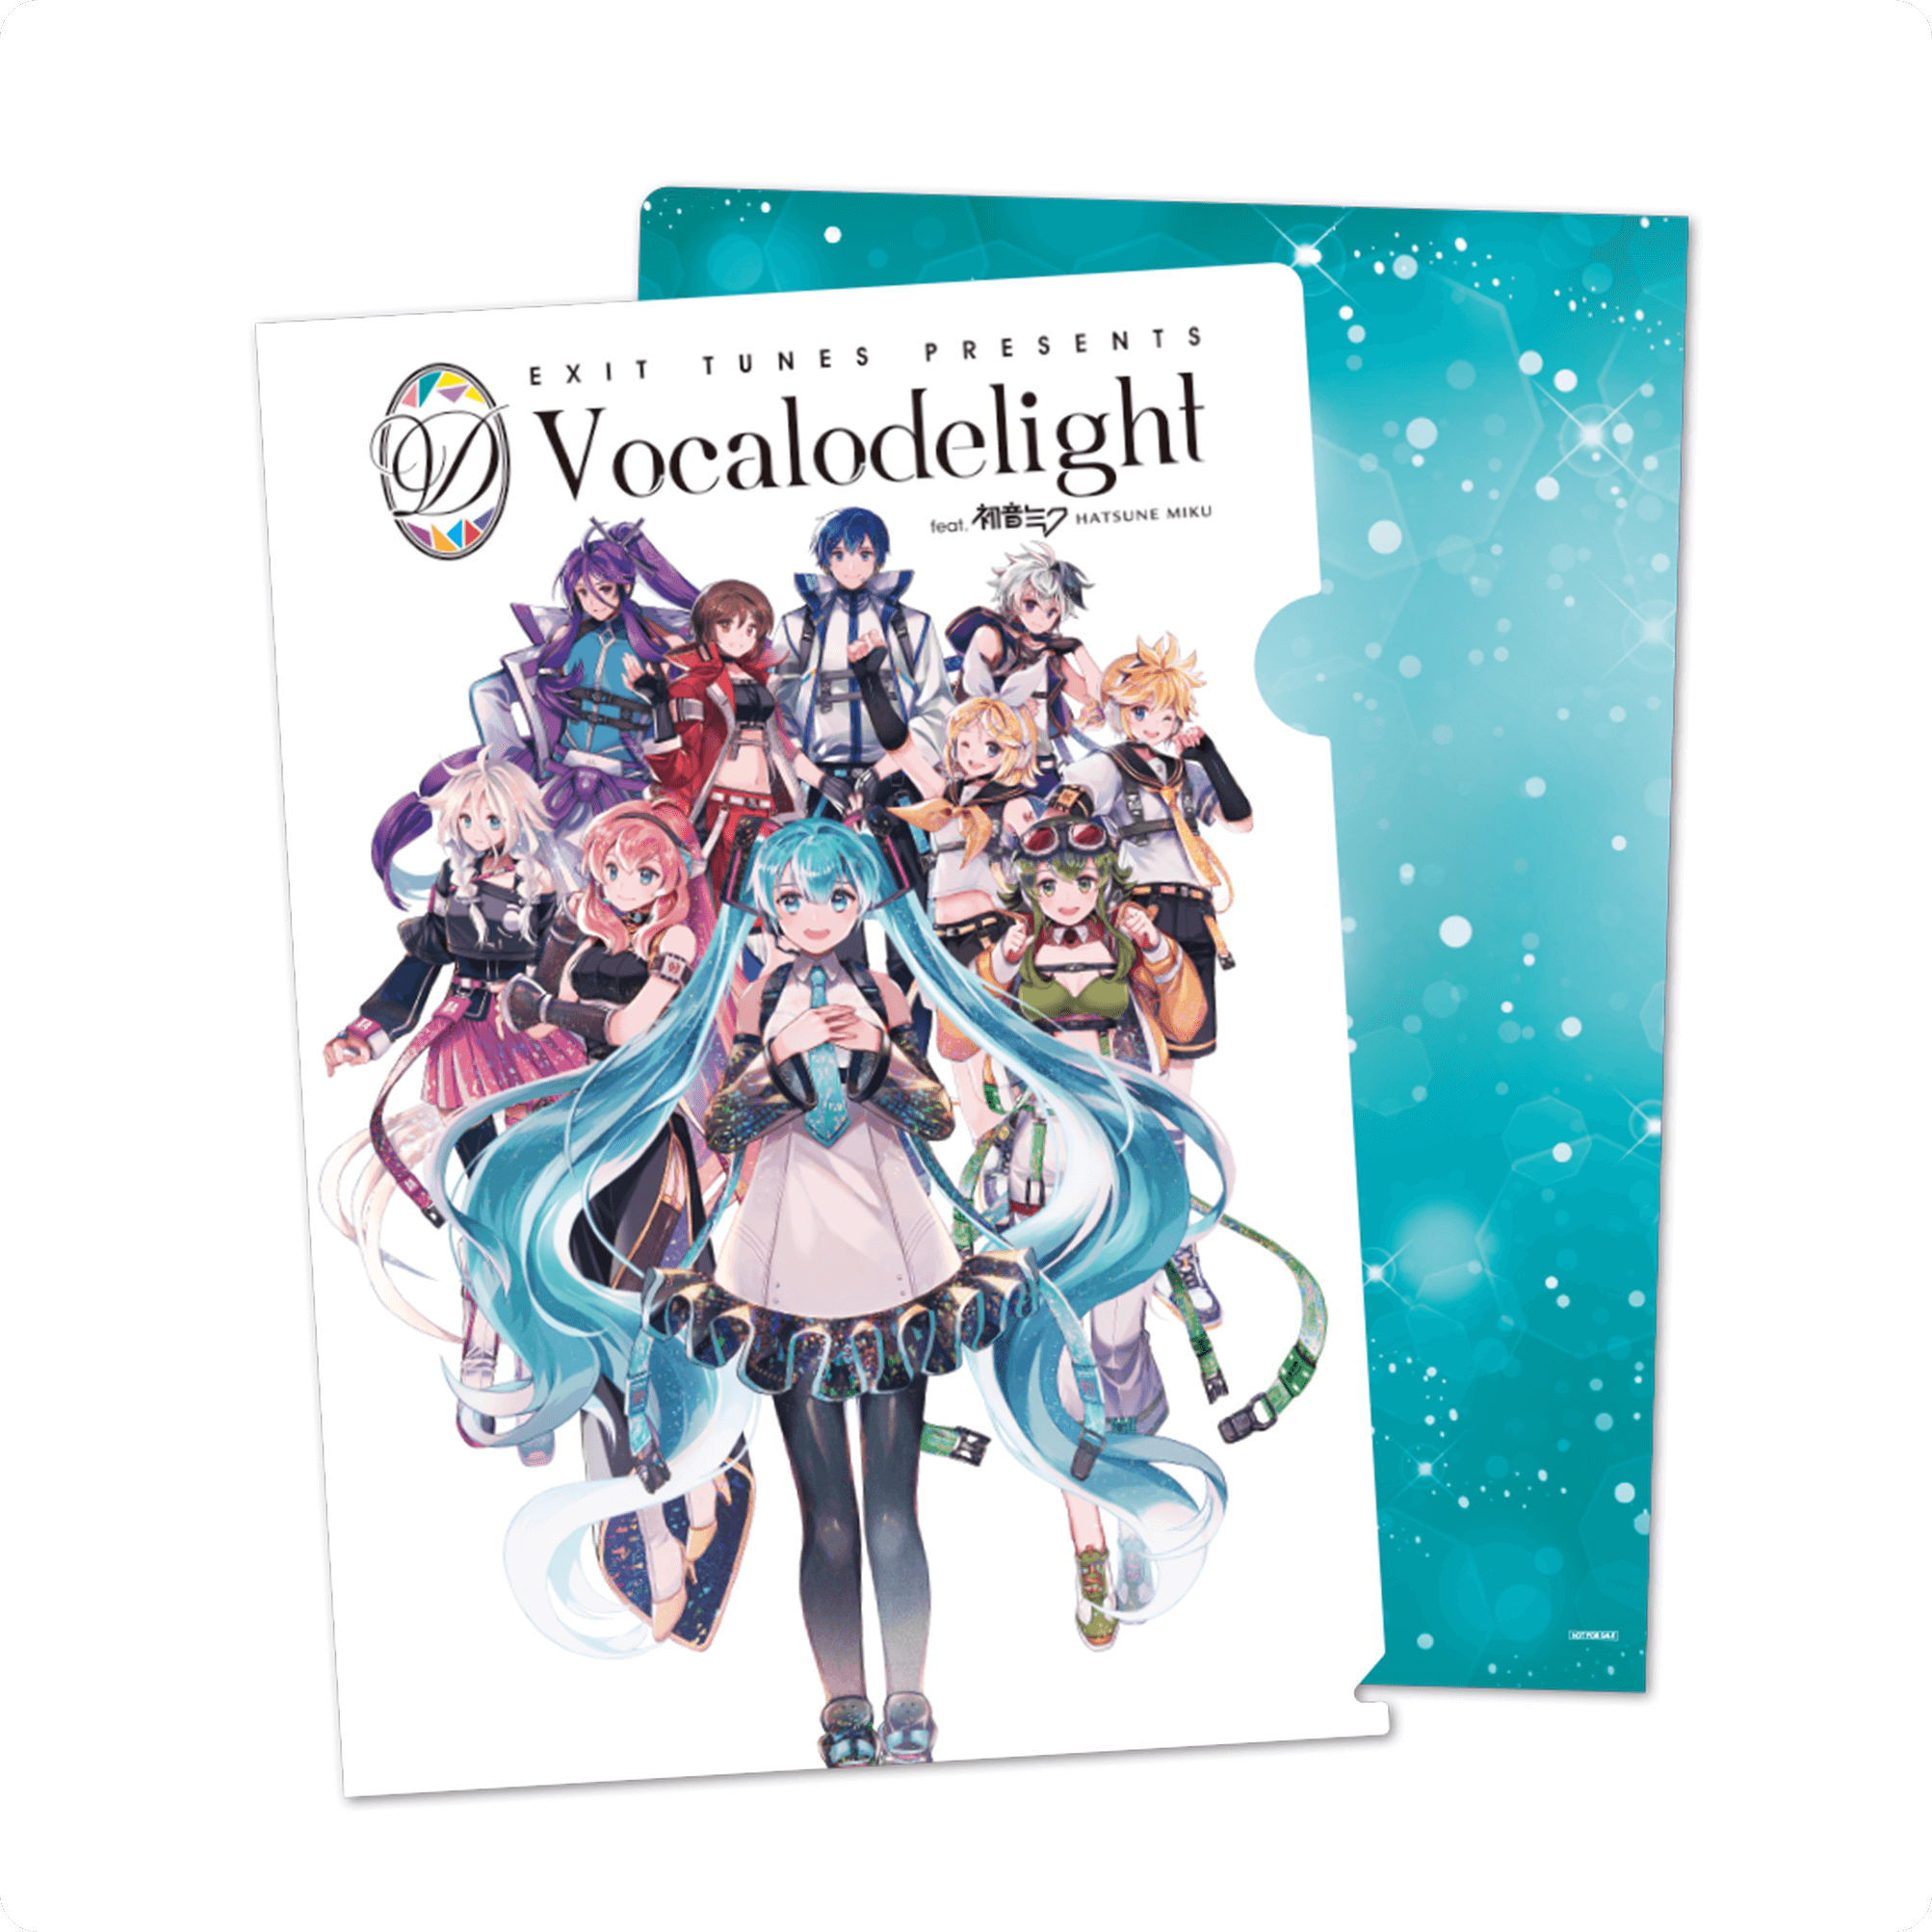 EXIT TUNES PRESENTS Vocalodelight feat.初音ミク